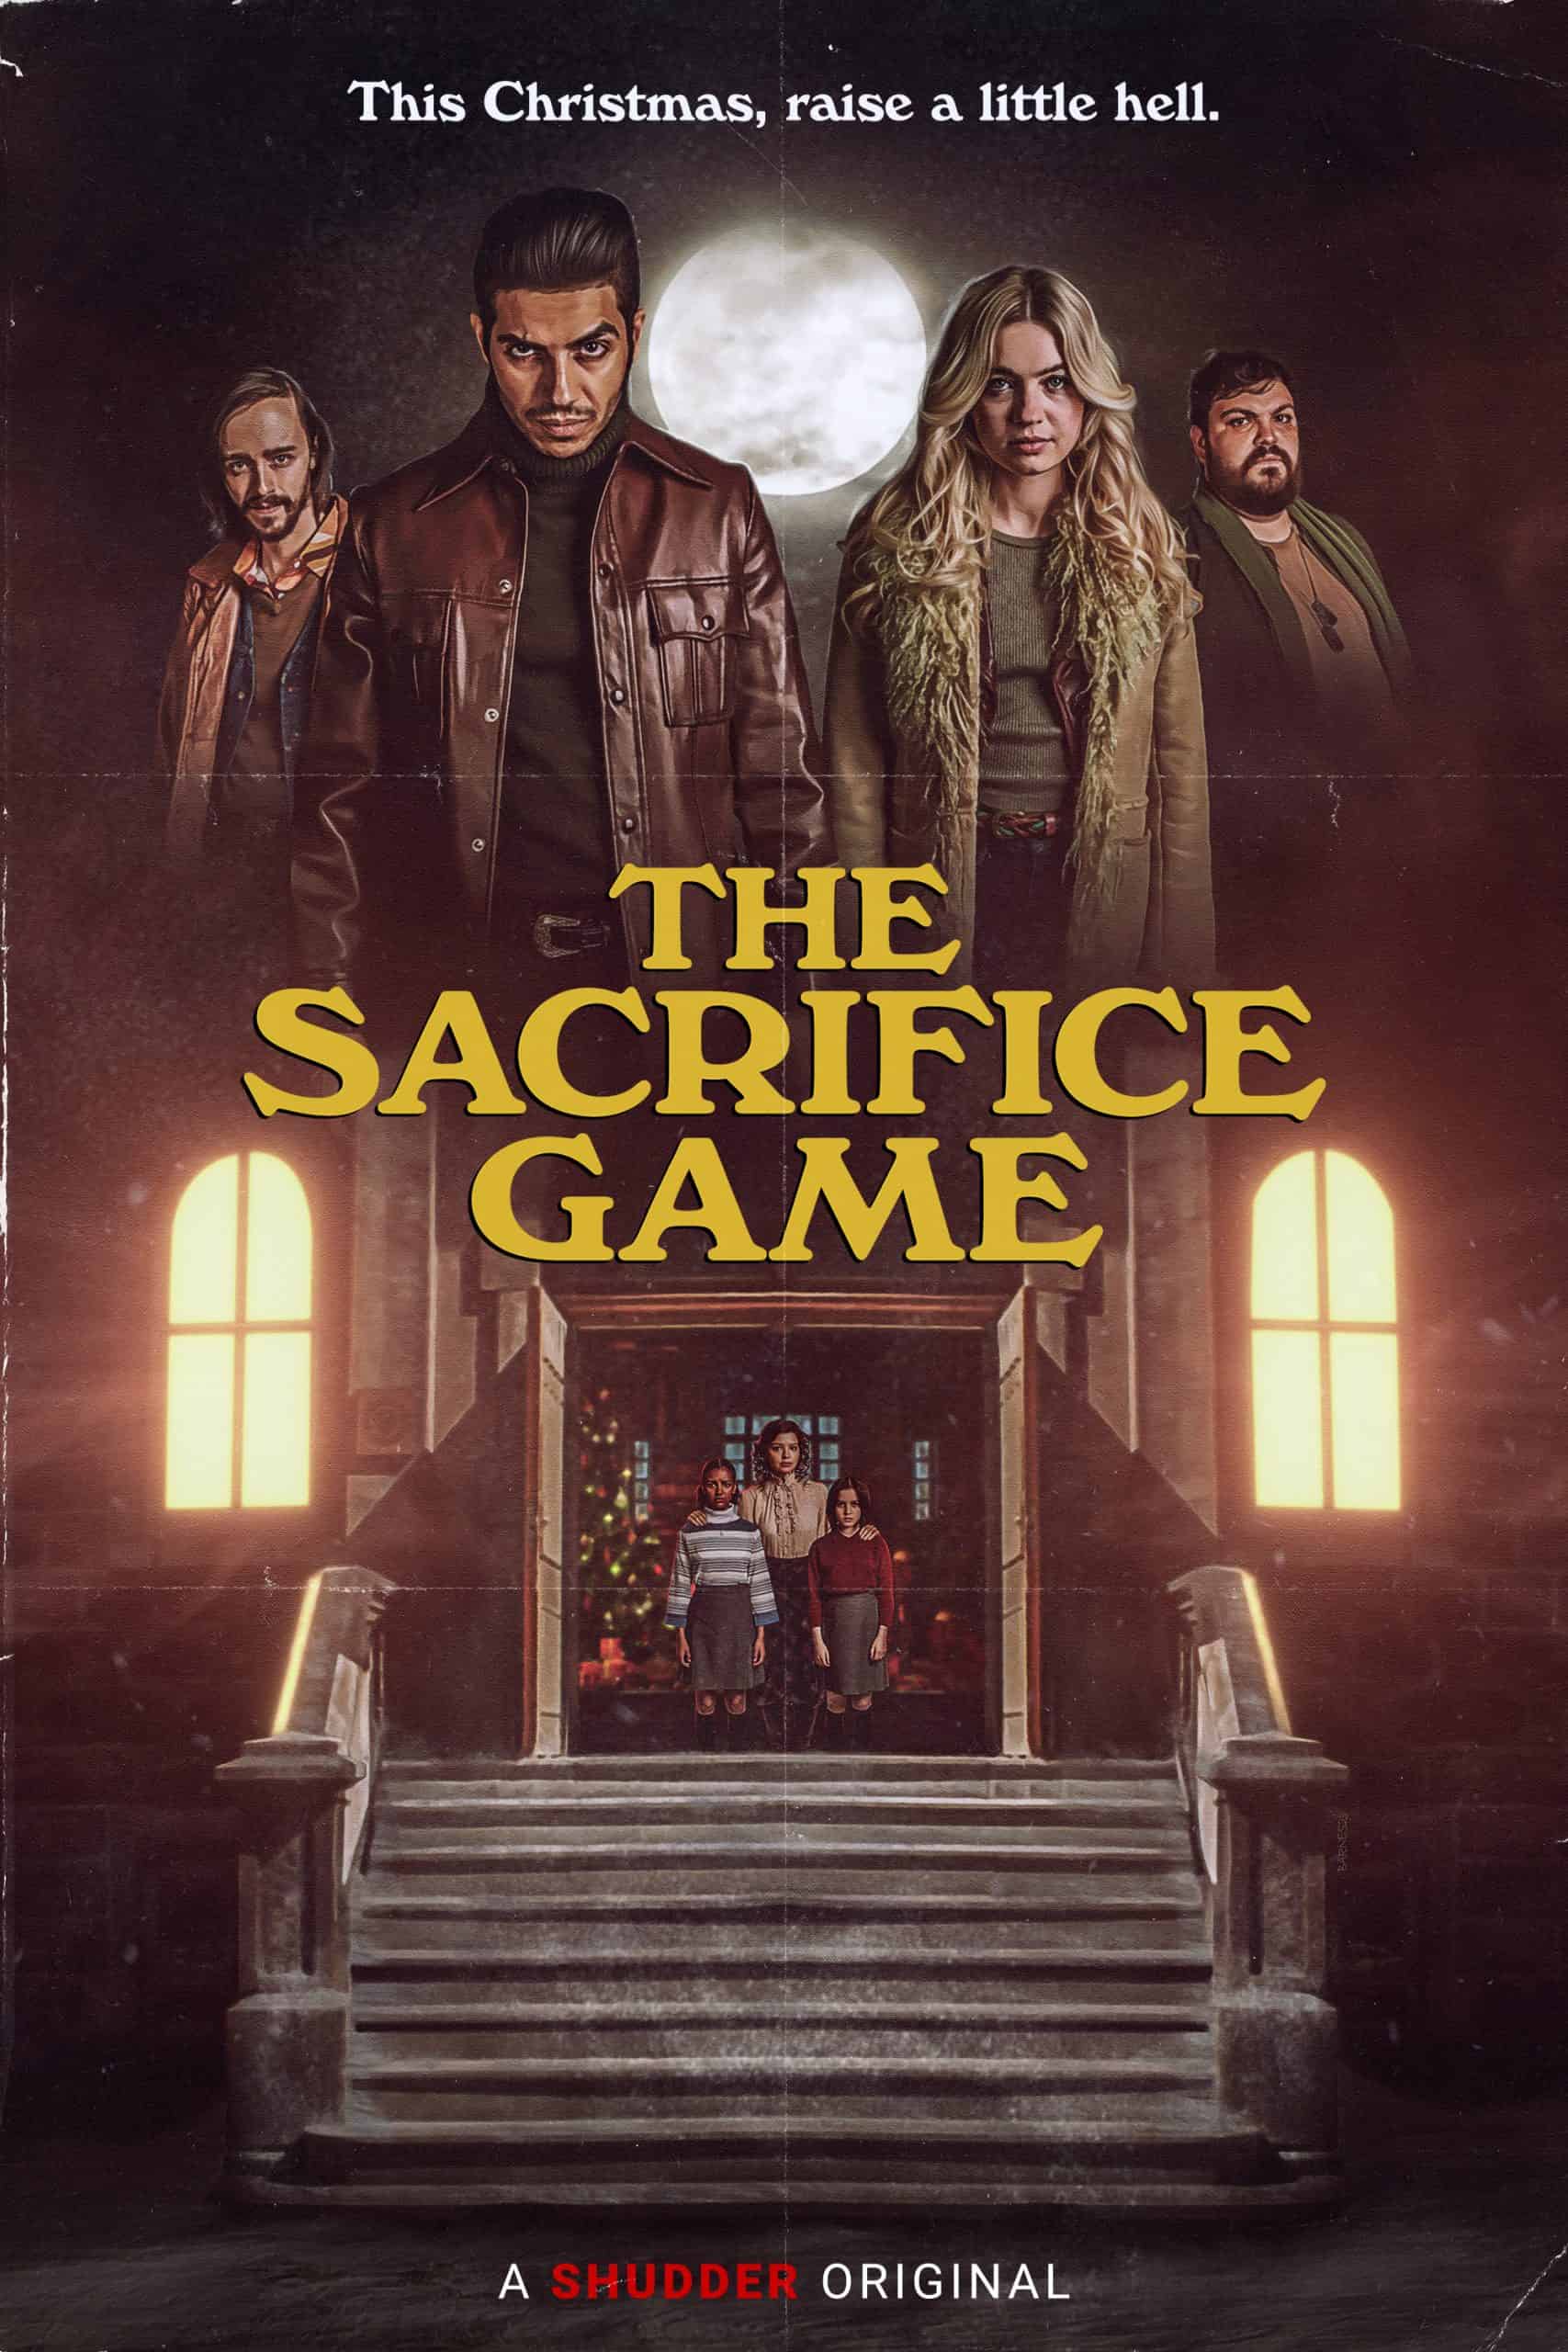 The Sacrifice Game: A Chilling Holiday Thriller Streaming on Shudder 62